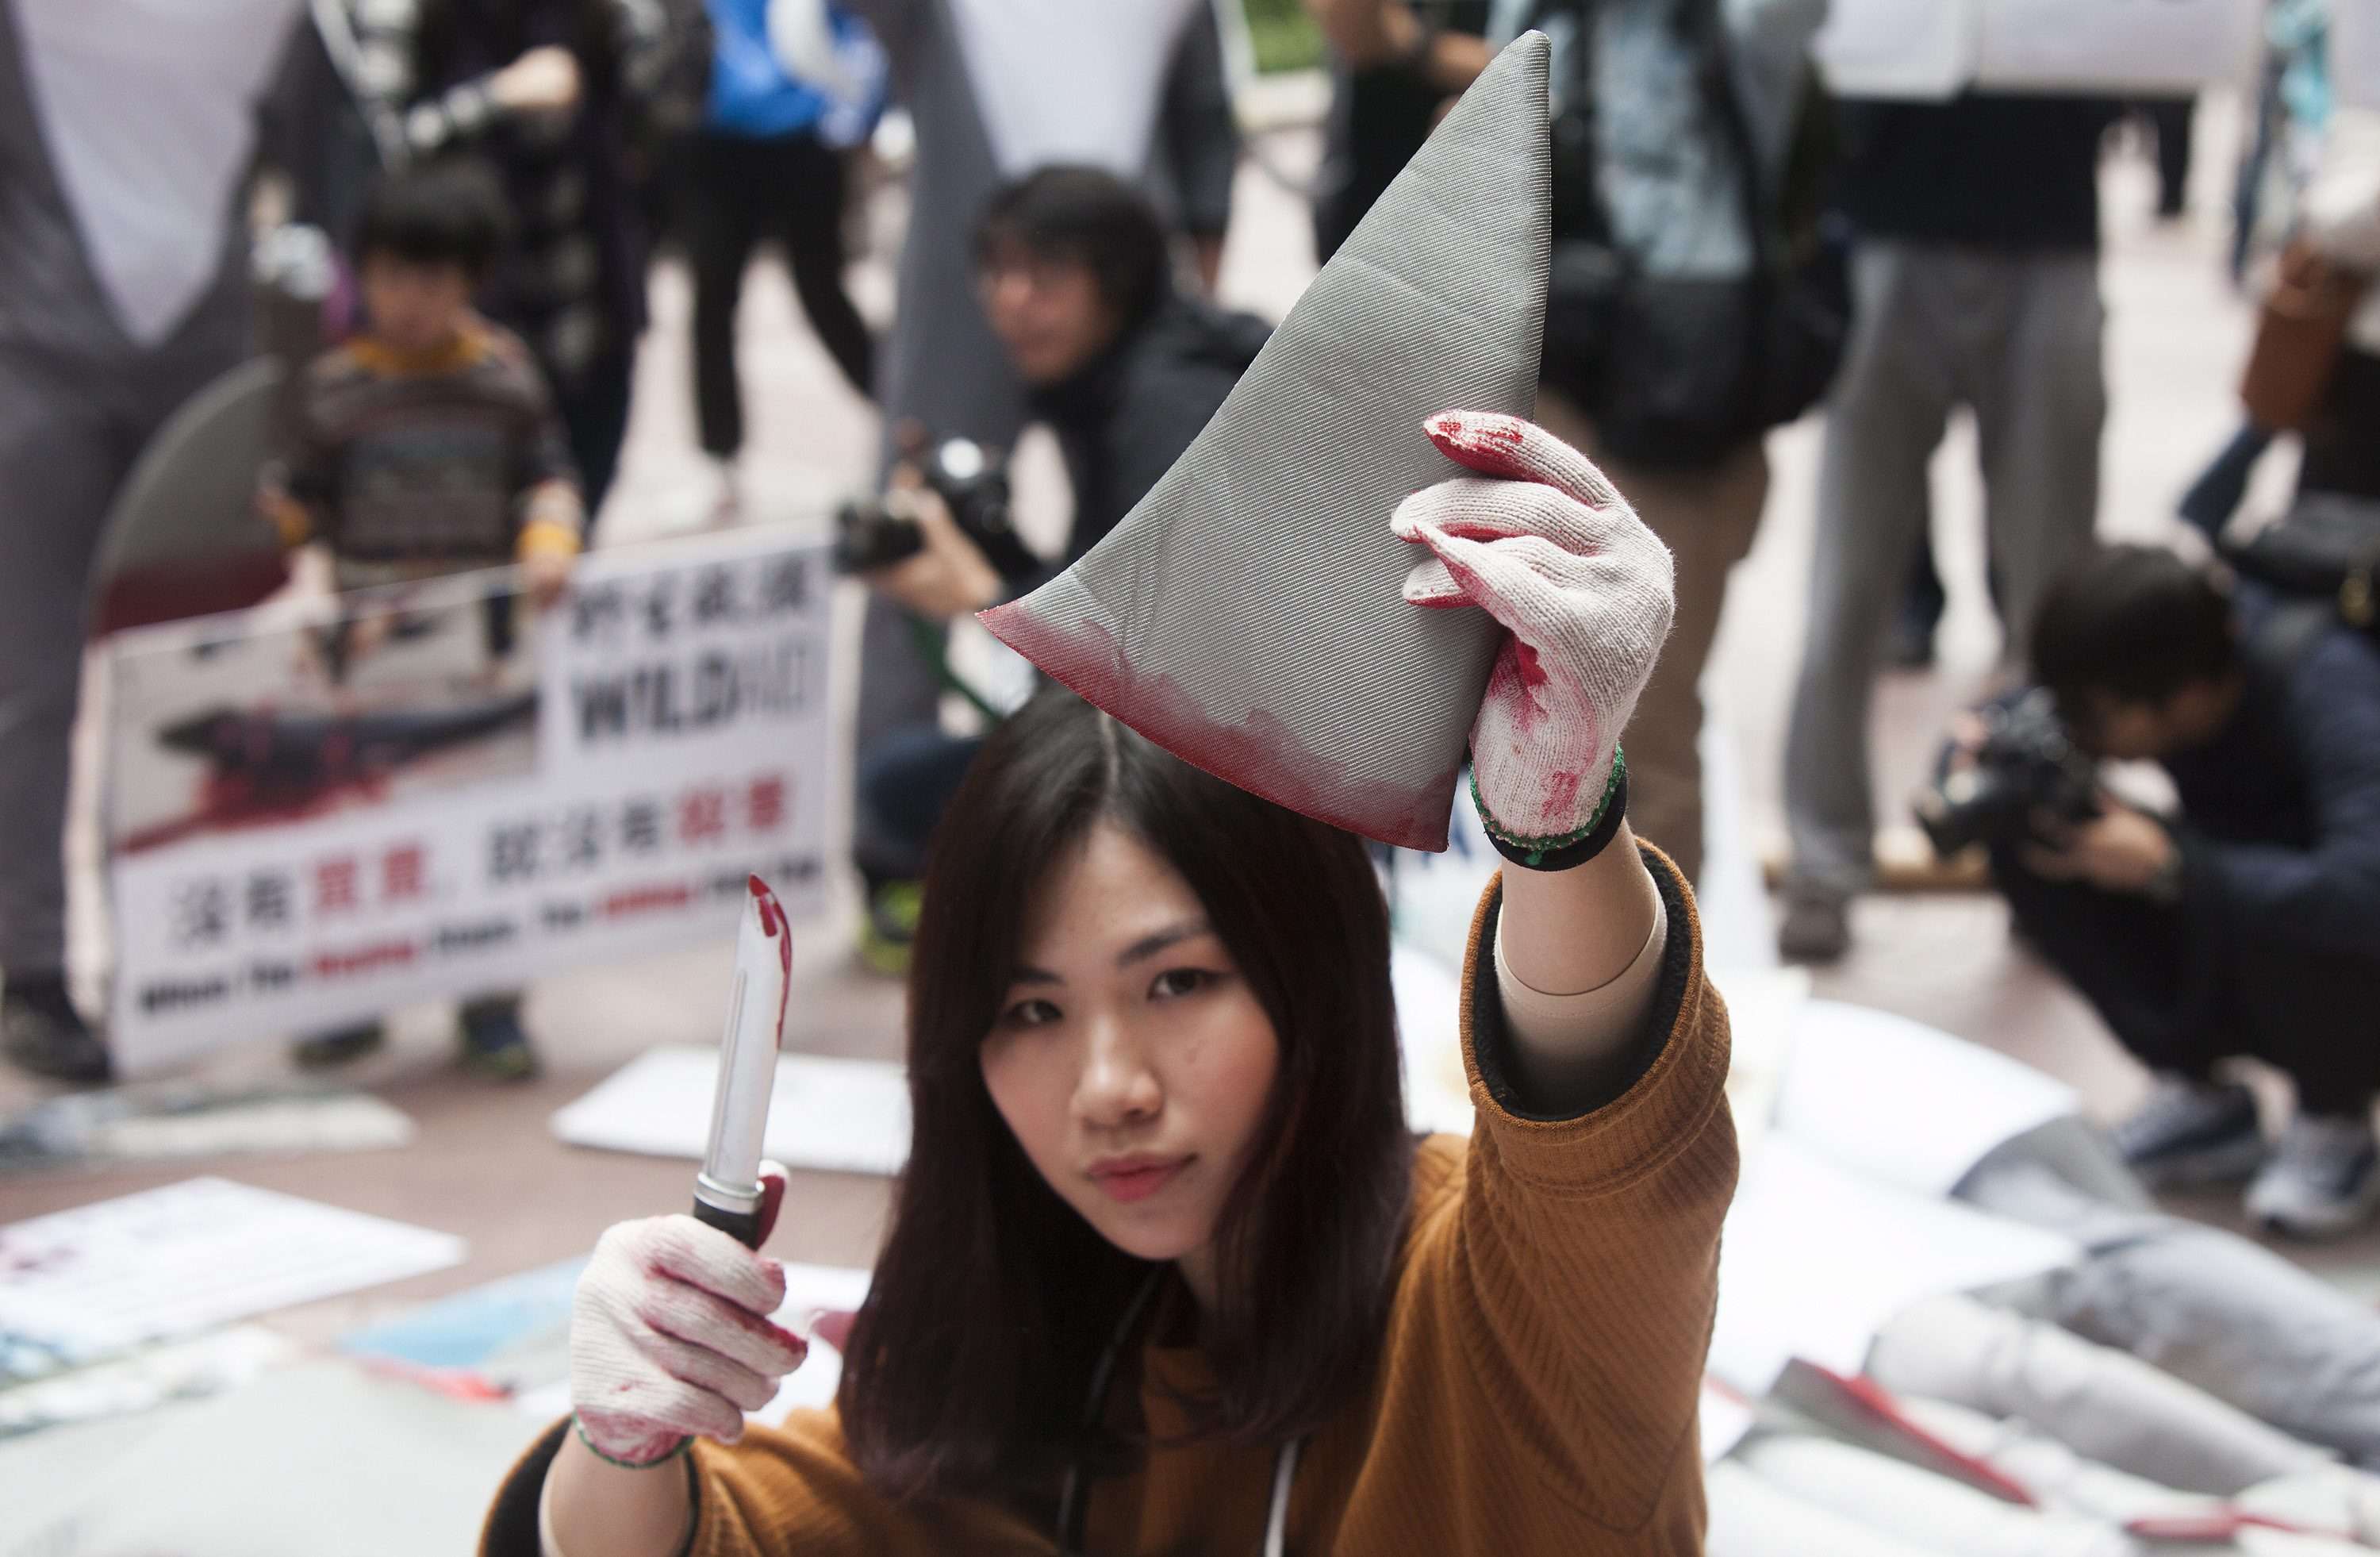 Activists in Hong Kong protest against the consumption of shark fin, during a demonstration earlier this year. Photo: EPA